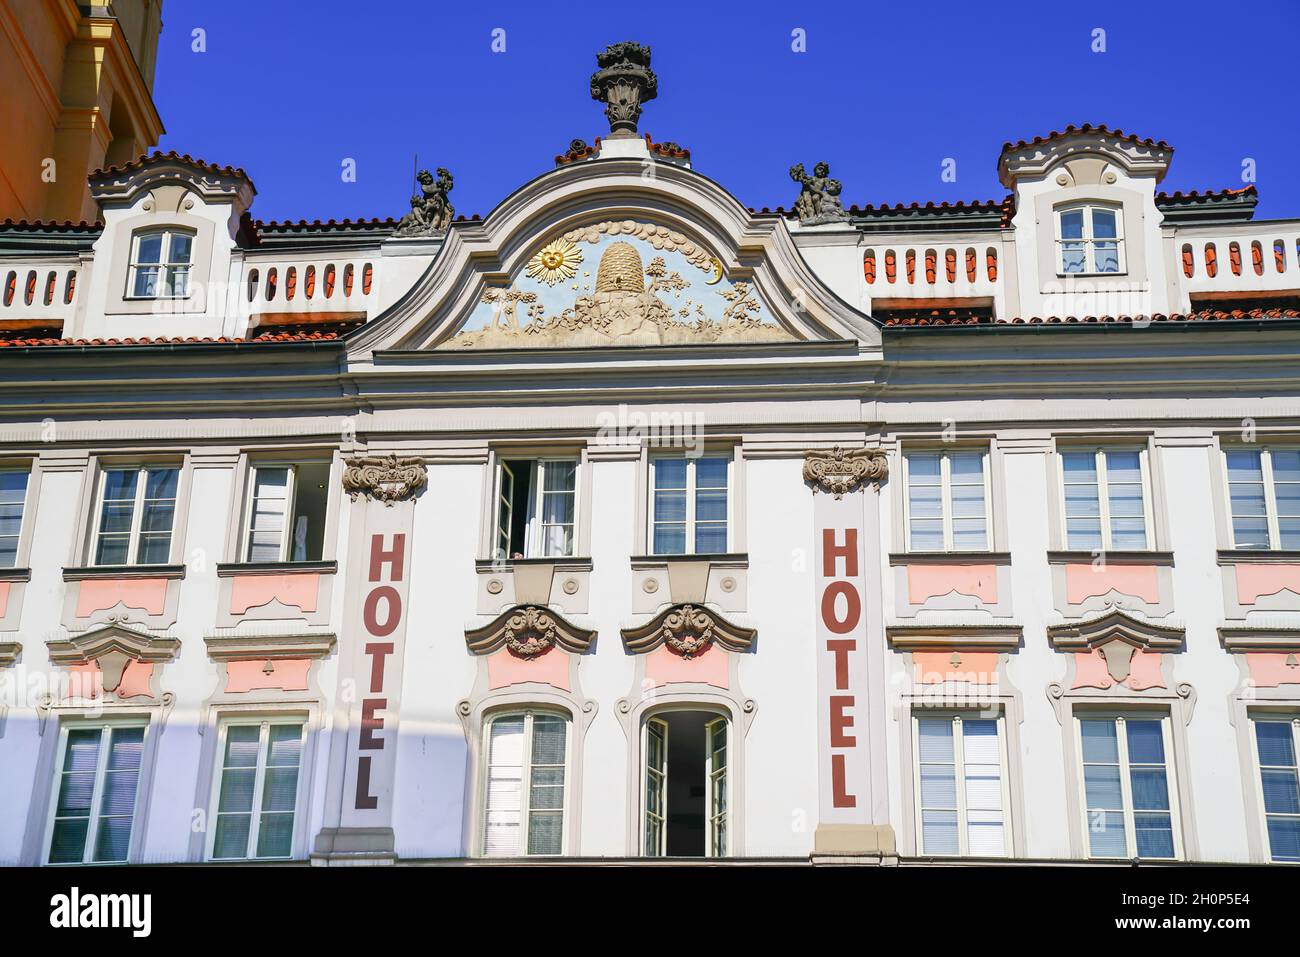 Prague Czech Republic -August 30 2017; Front facade of Hotel Prague Inn with its ornate architecture and beehive image Stock Photo